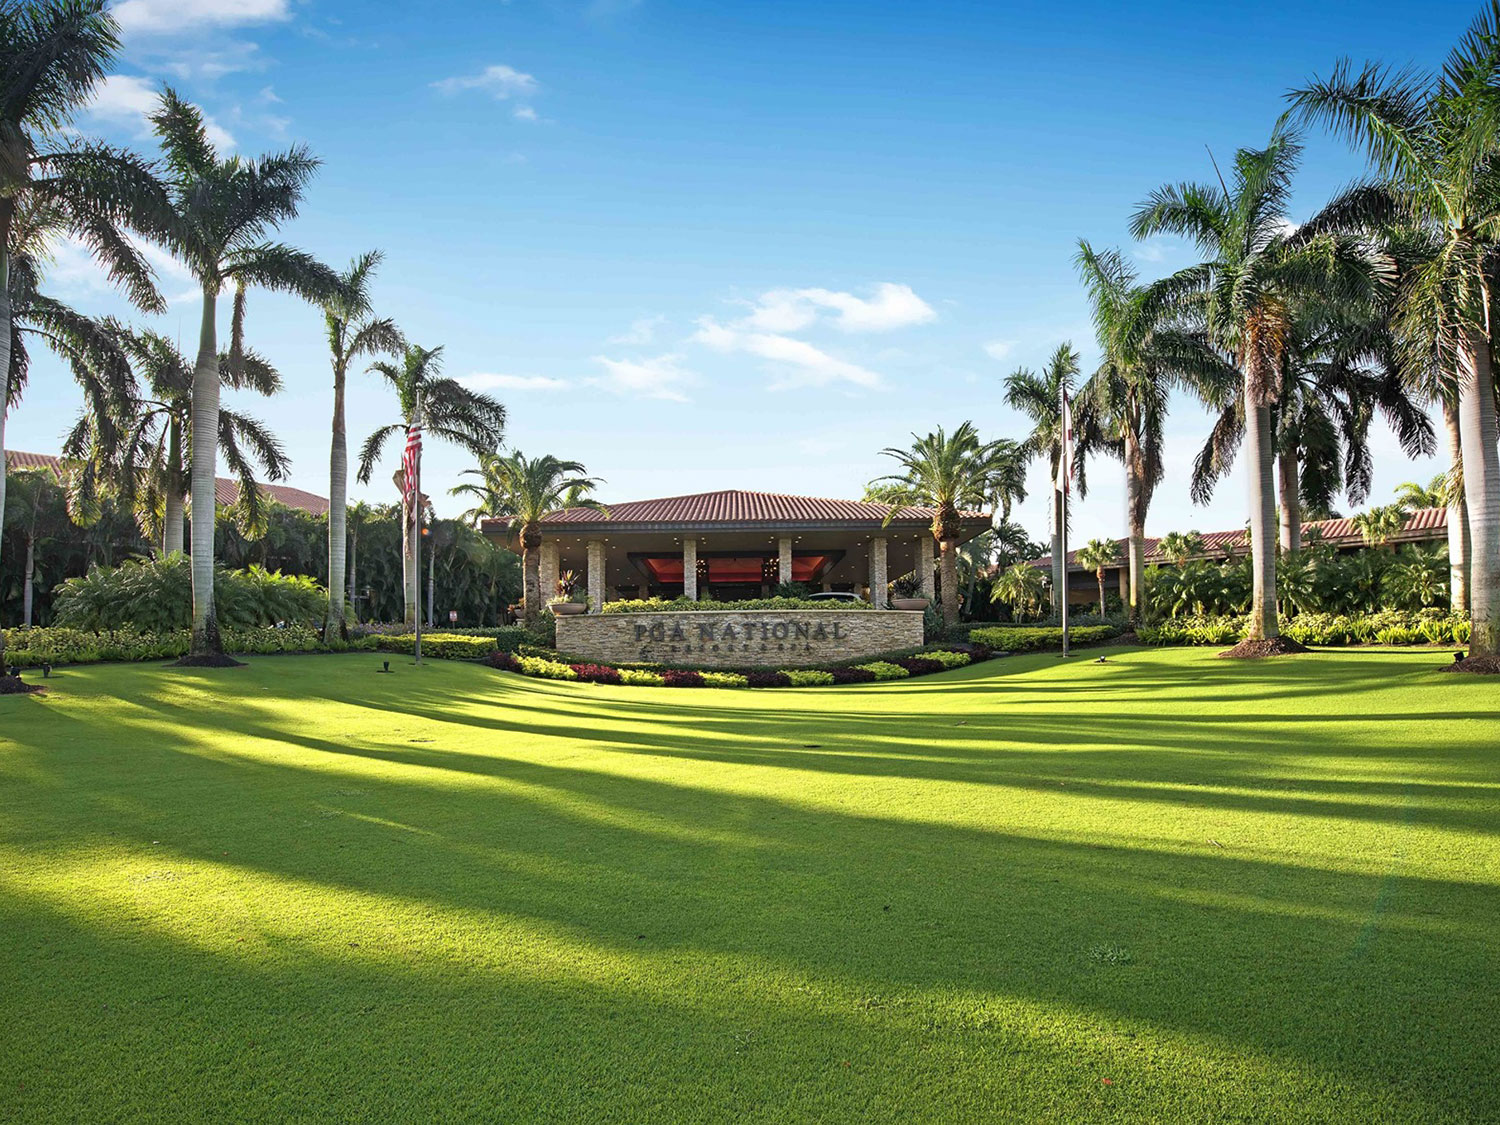 The exterior of the main entrance to the PGA National resort in Palm Beach Gardens, Florida.